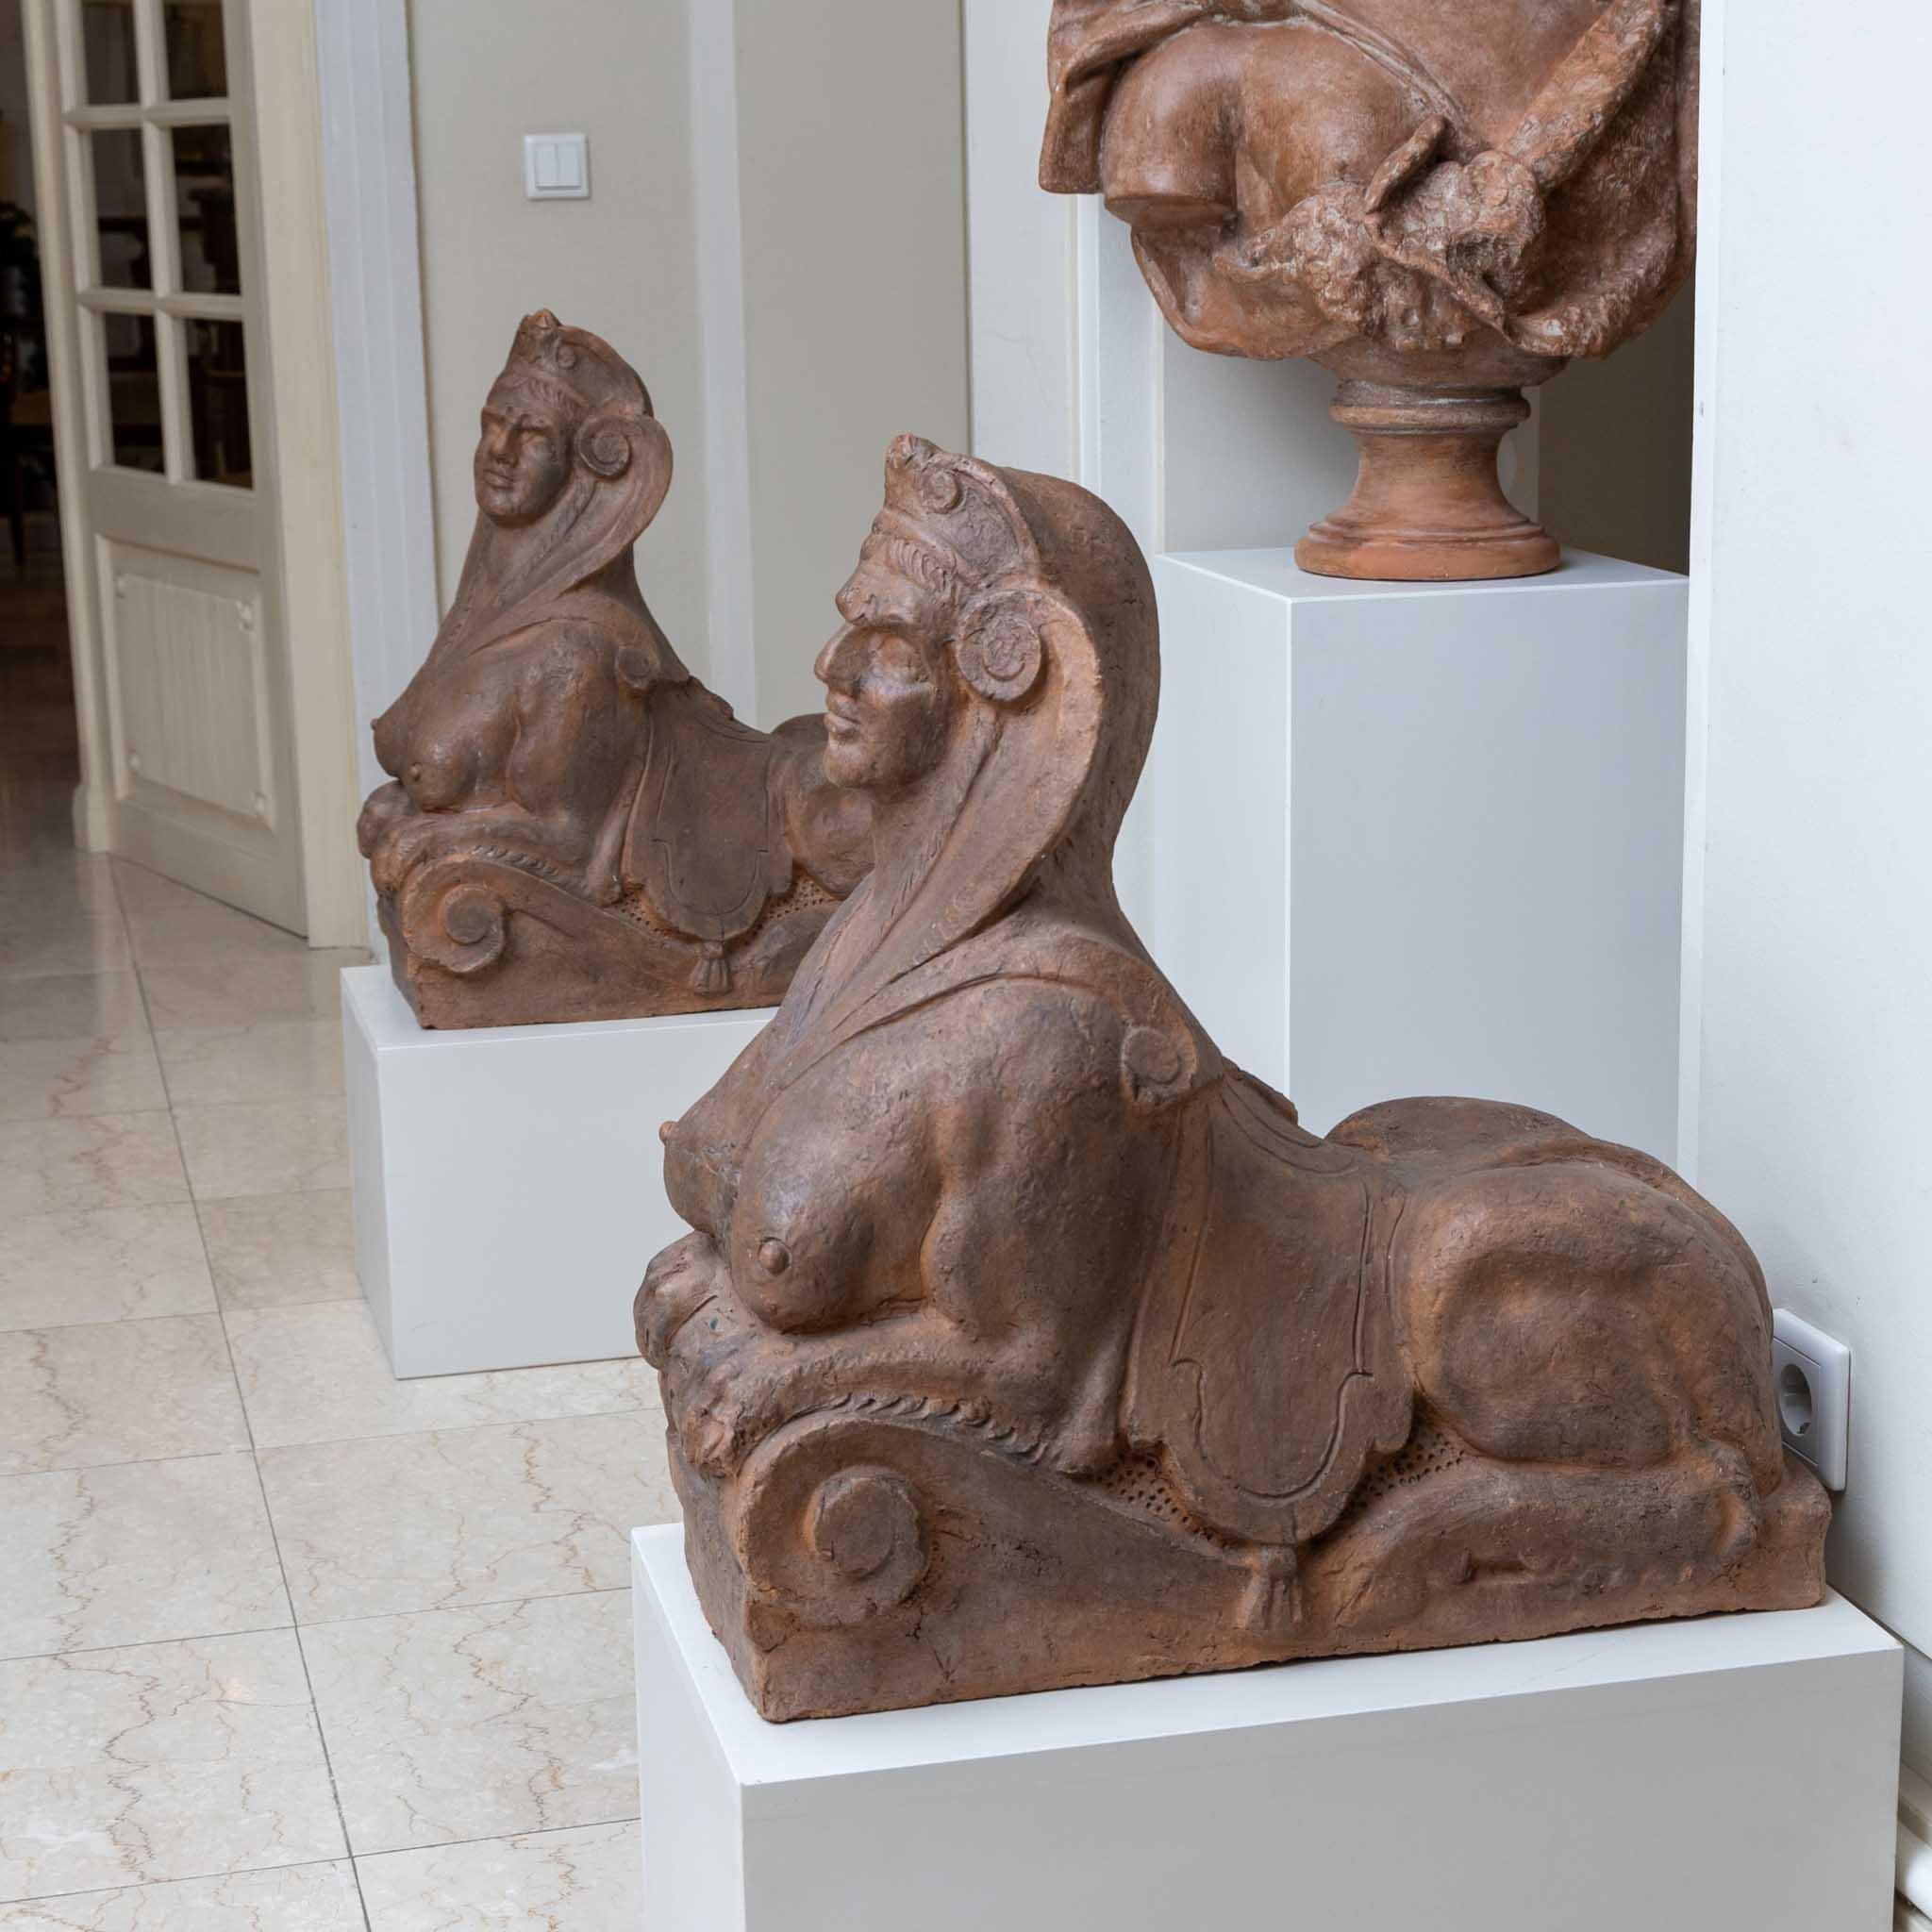 Pair of large, eroticized terracotta sphinxes, supporting their front legs on a large volute.